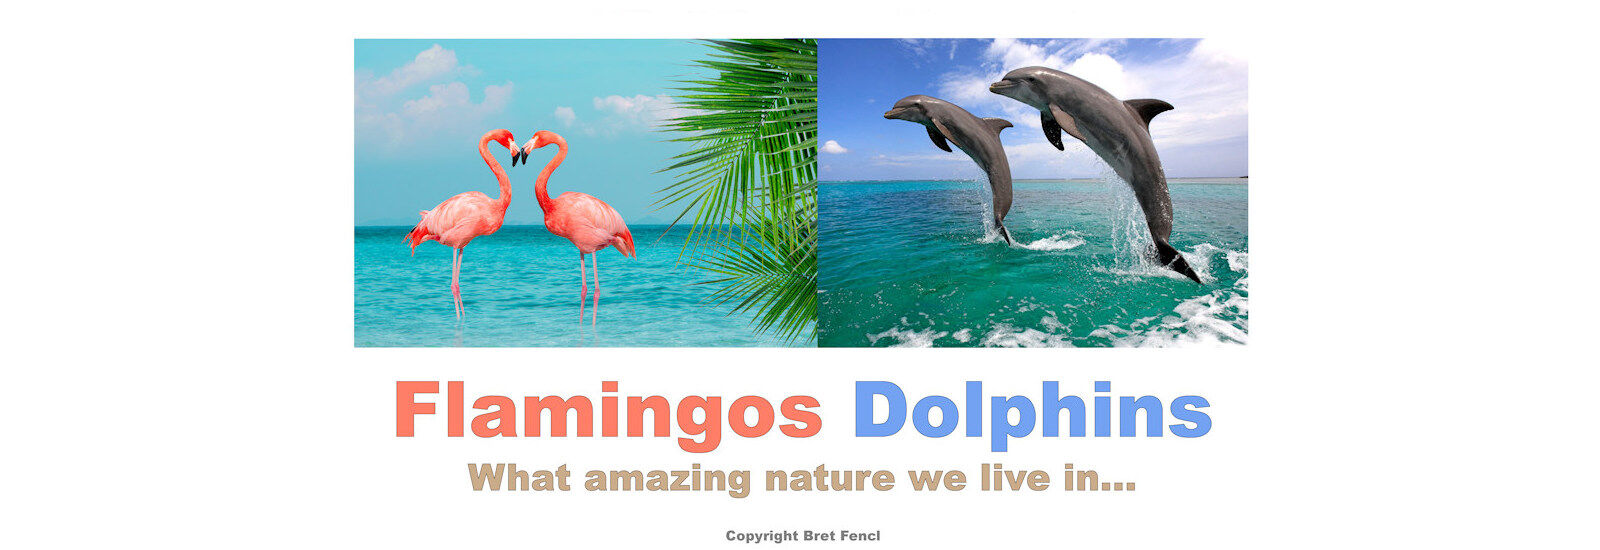 Flamingos, Dolphins, What amazing nature we live in...